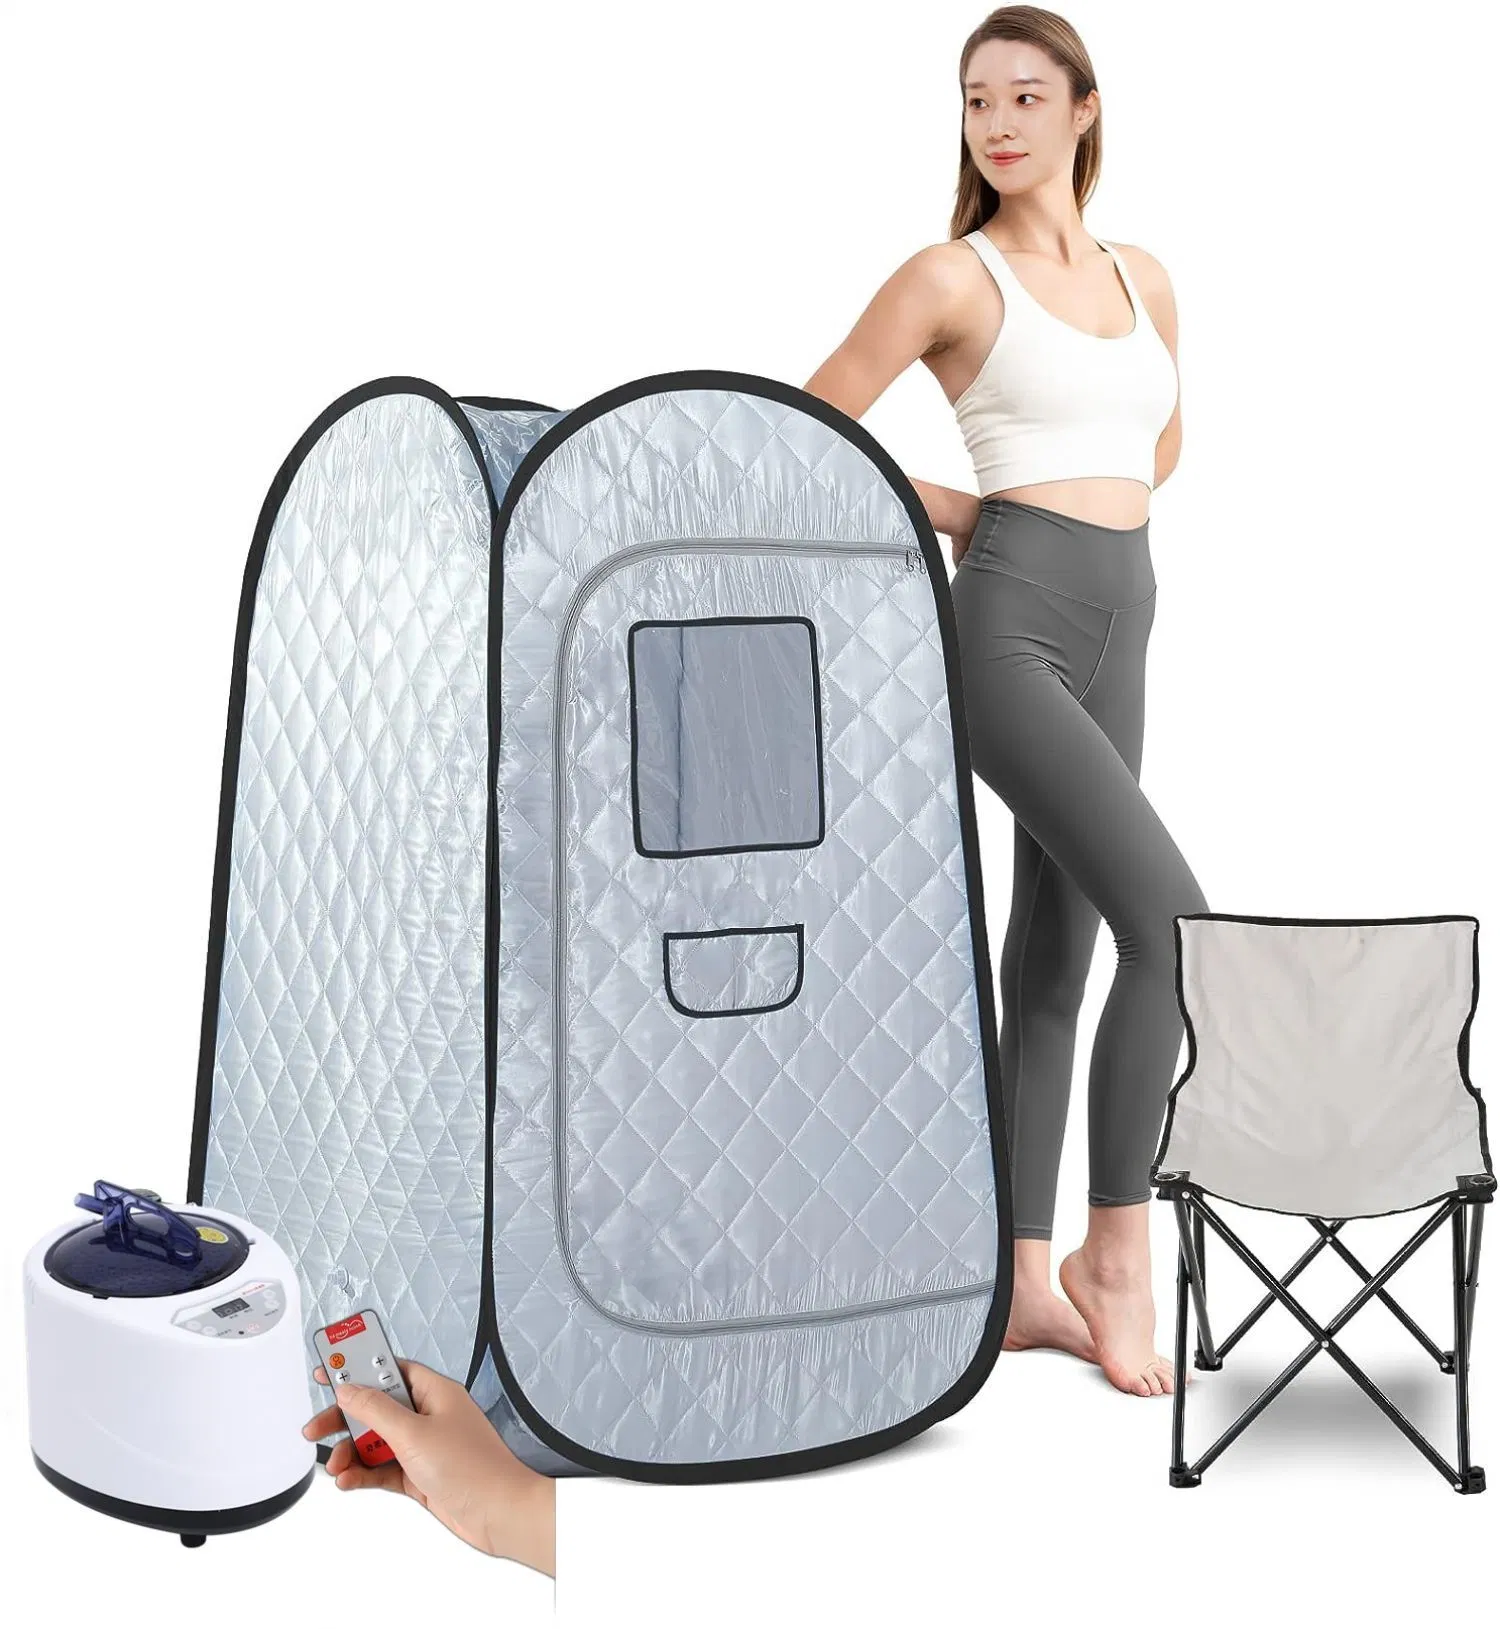 Amazon Source Portable Steam Sauna Detox Weight-Loss Therapy